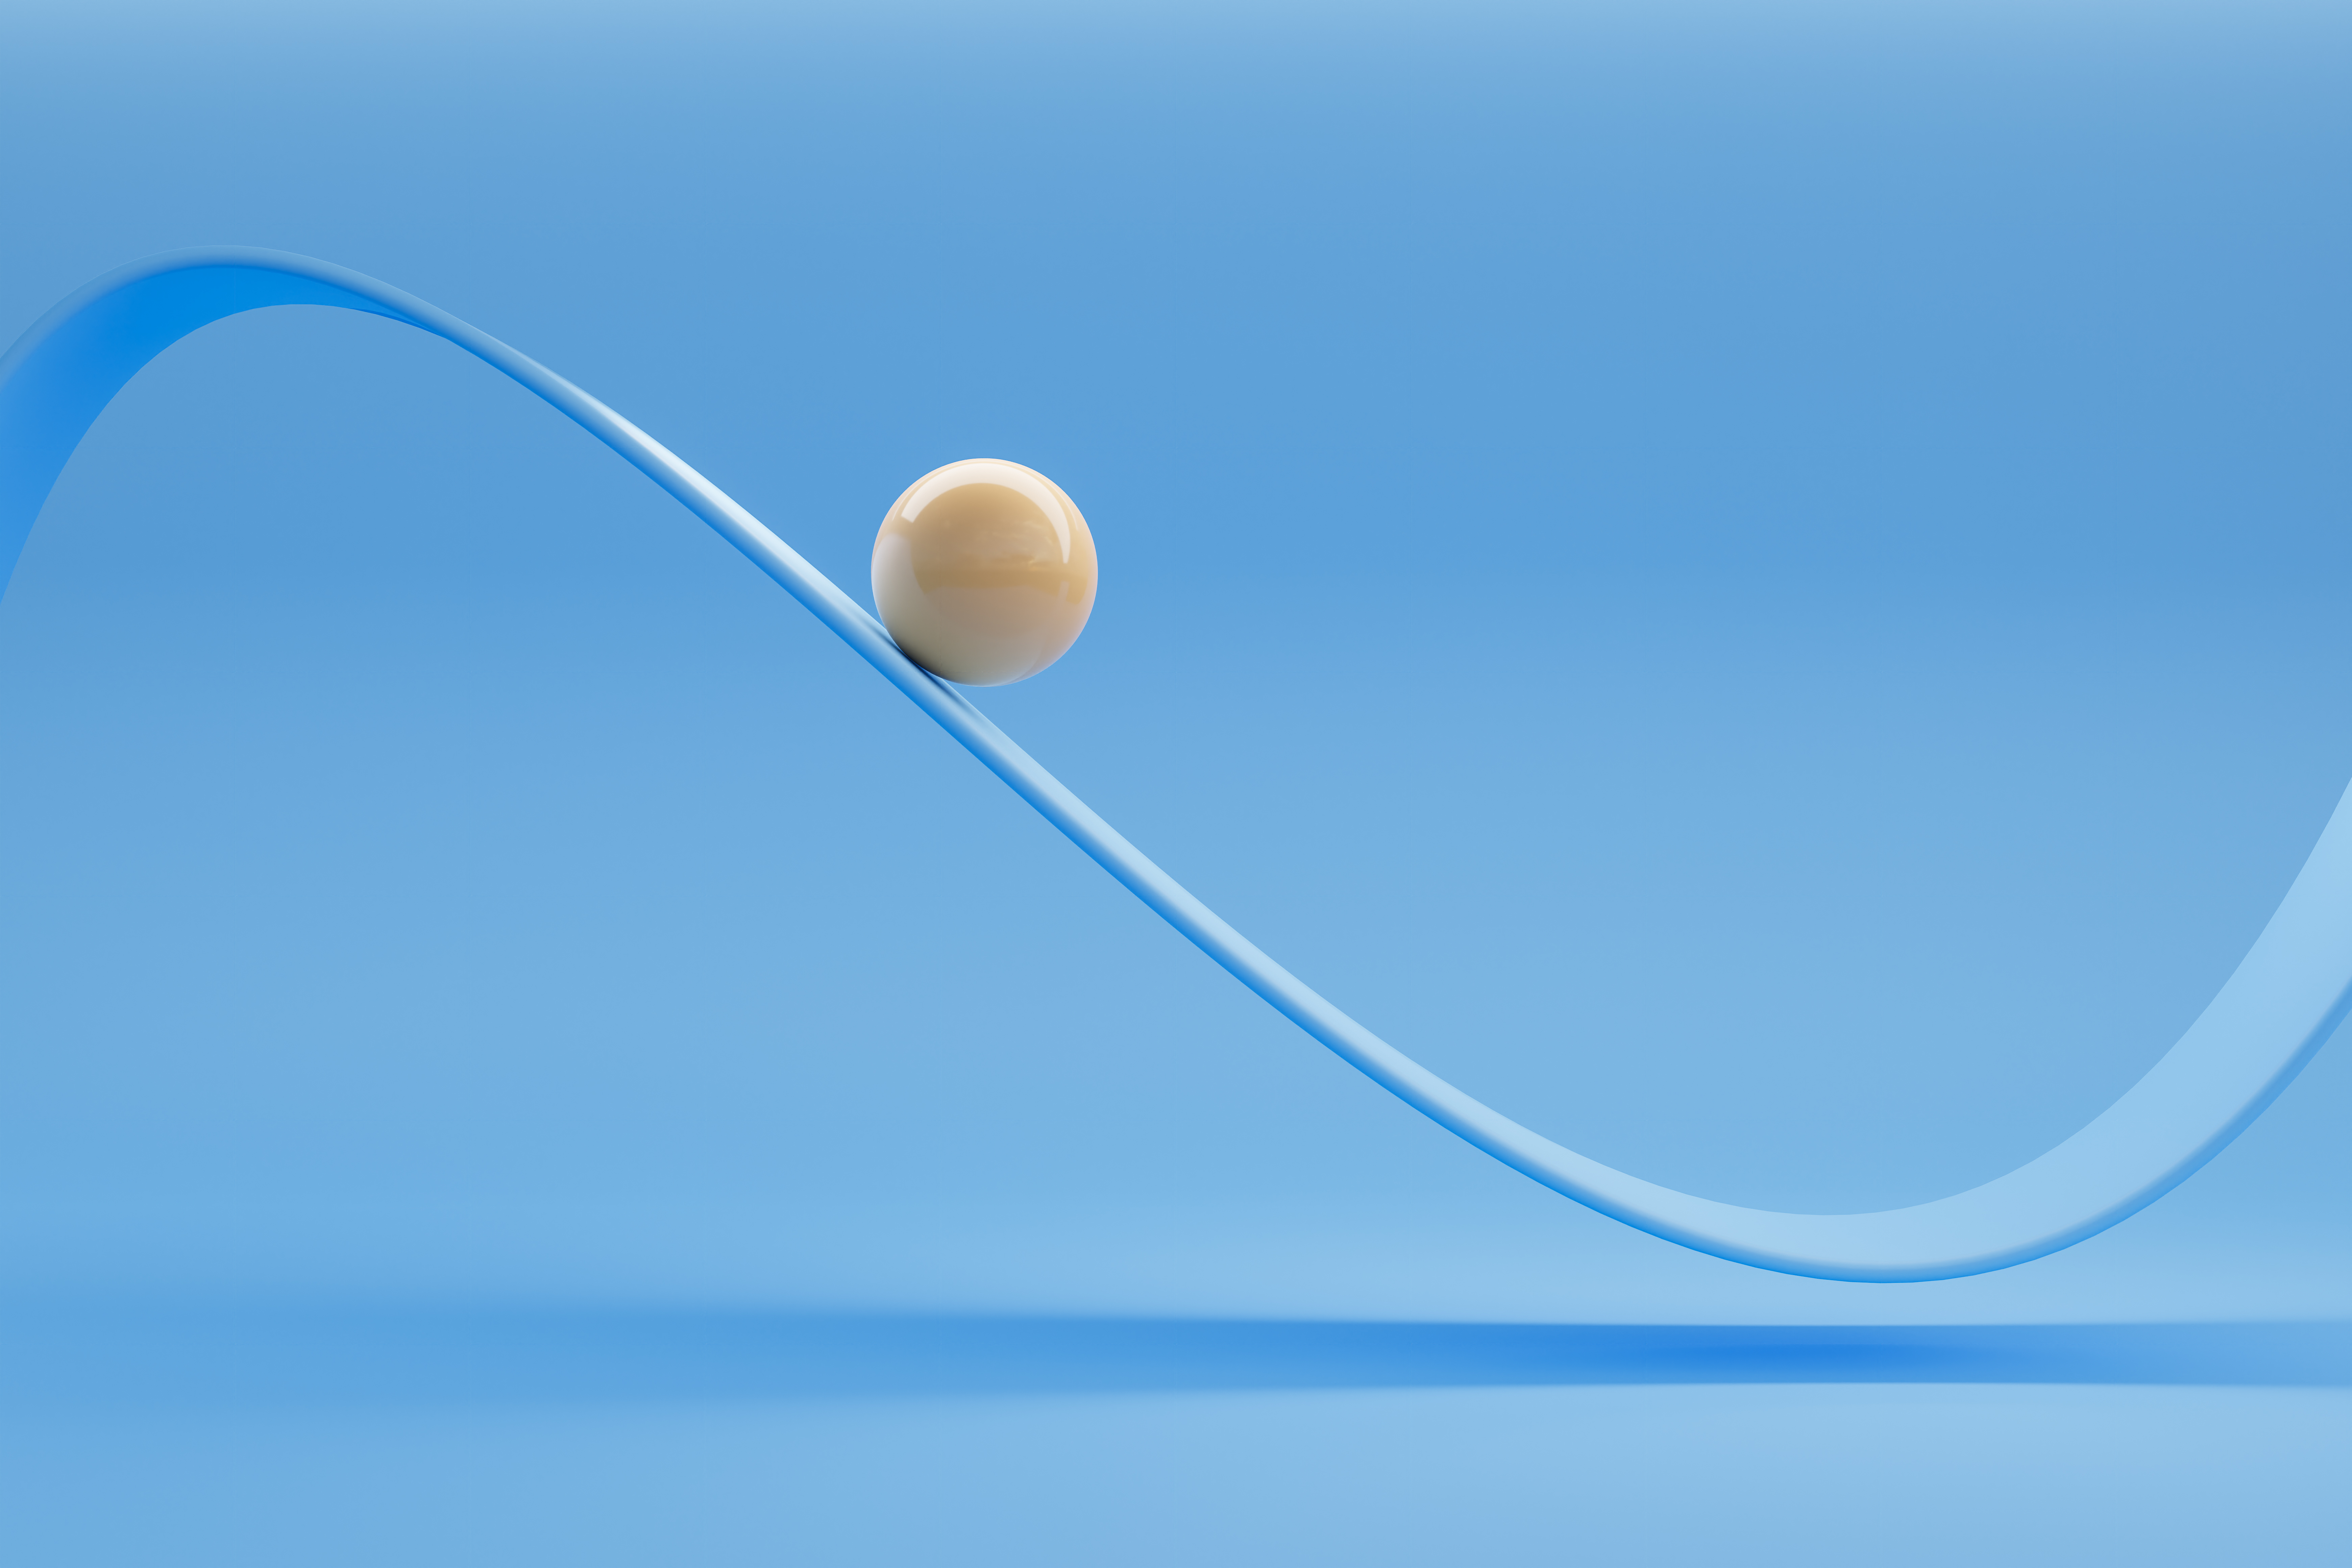 Image of a glossy white ceramic ball moving along an oscillating curve against a blue background.